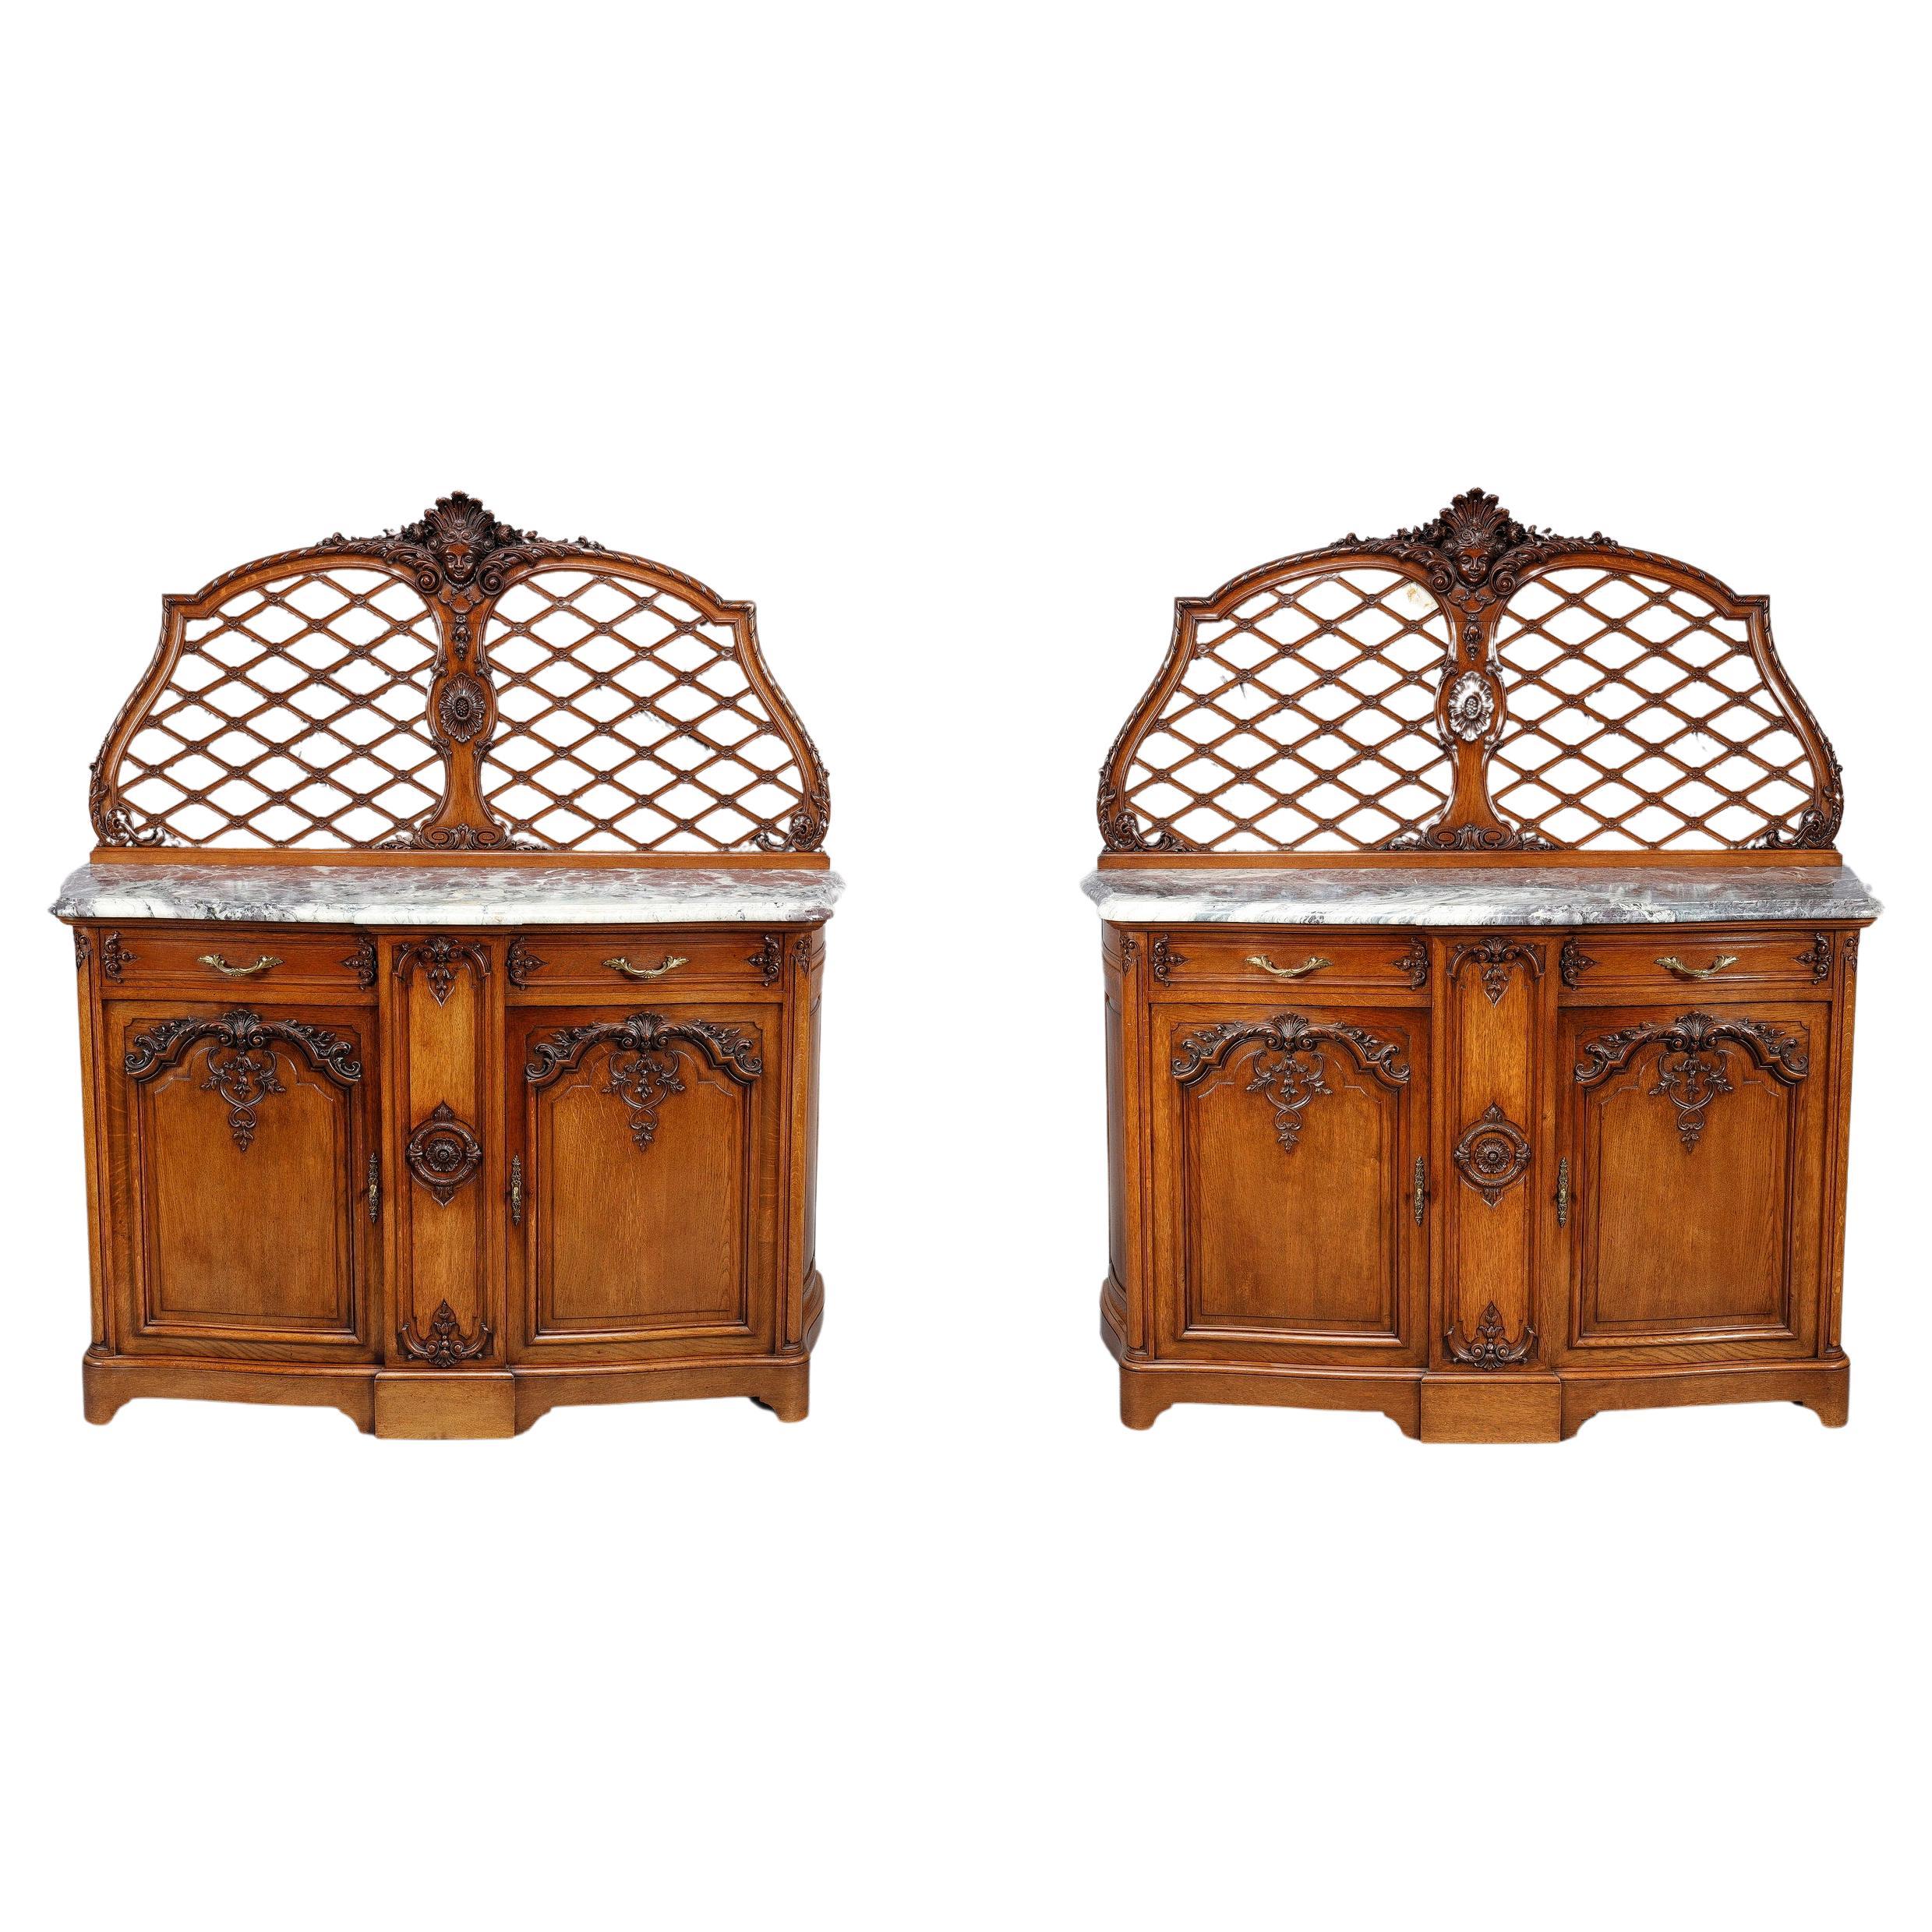 Pair of Regency-style sideboards in molded oak and marble For Sale